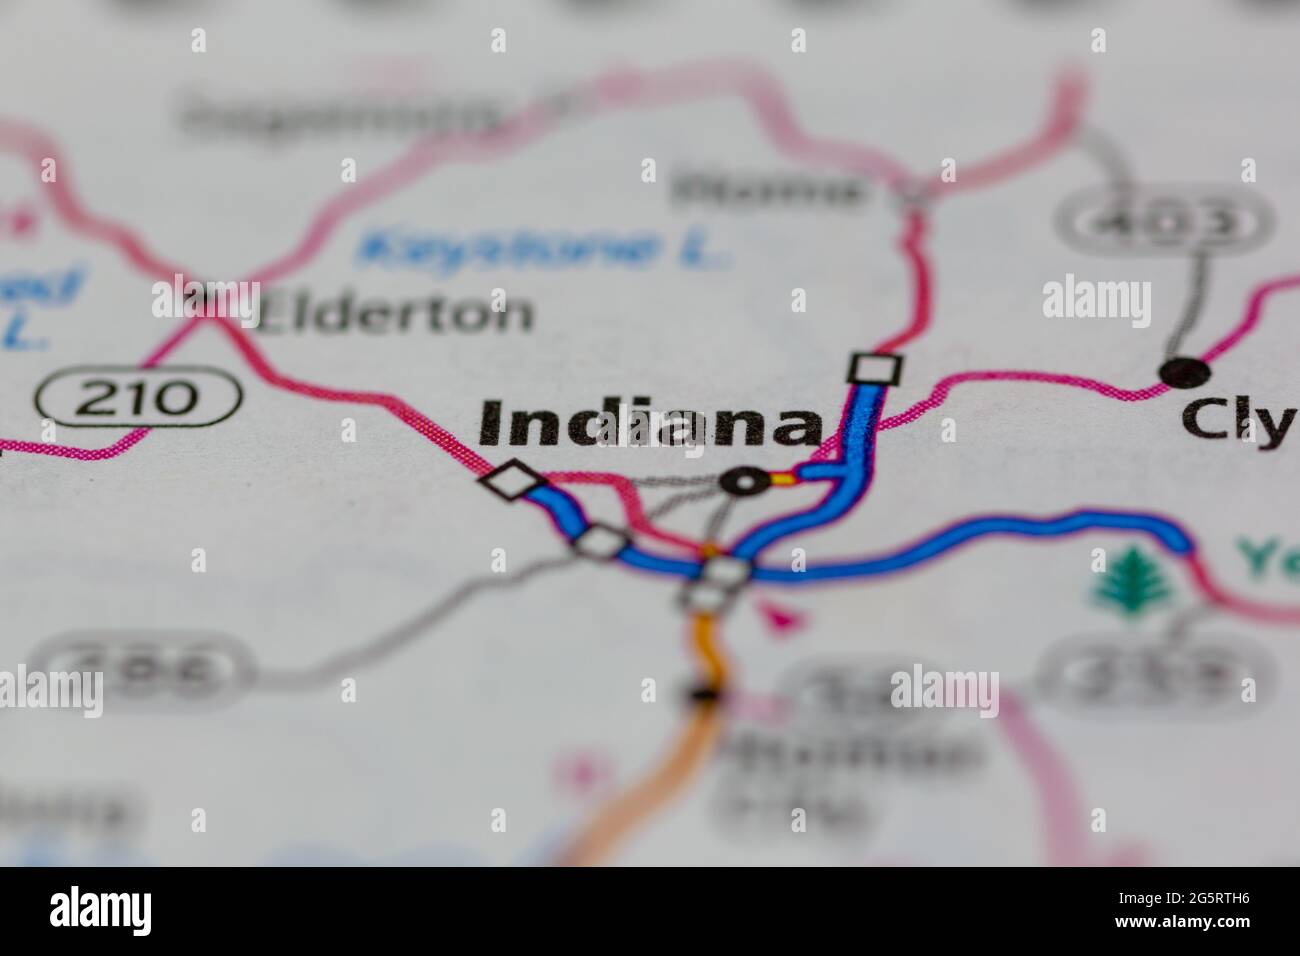 Indiana Pennsylvania USA shown on a Geography map or Road map Stock Photo